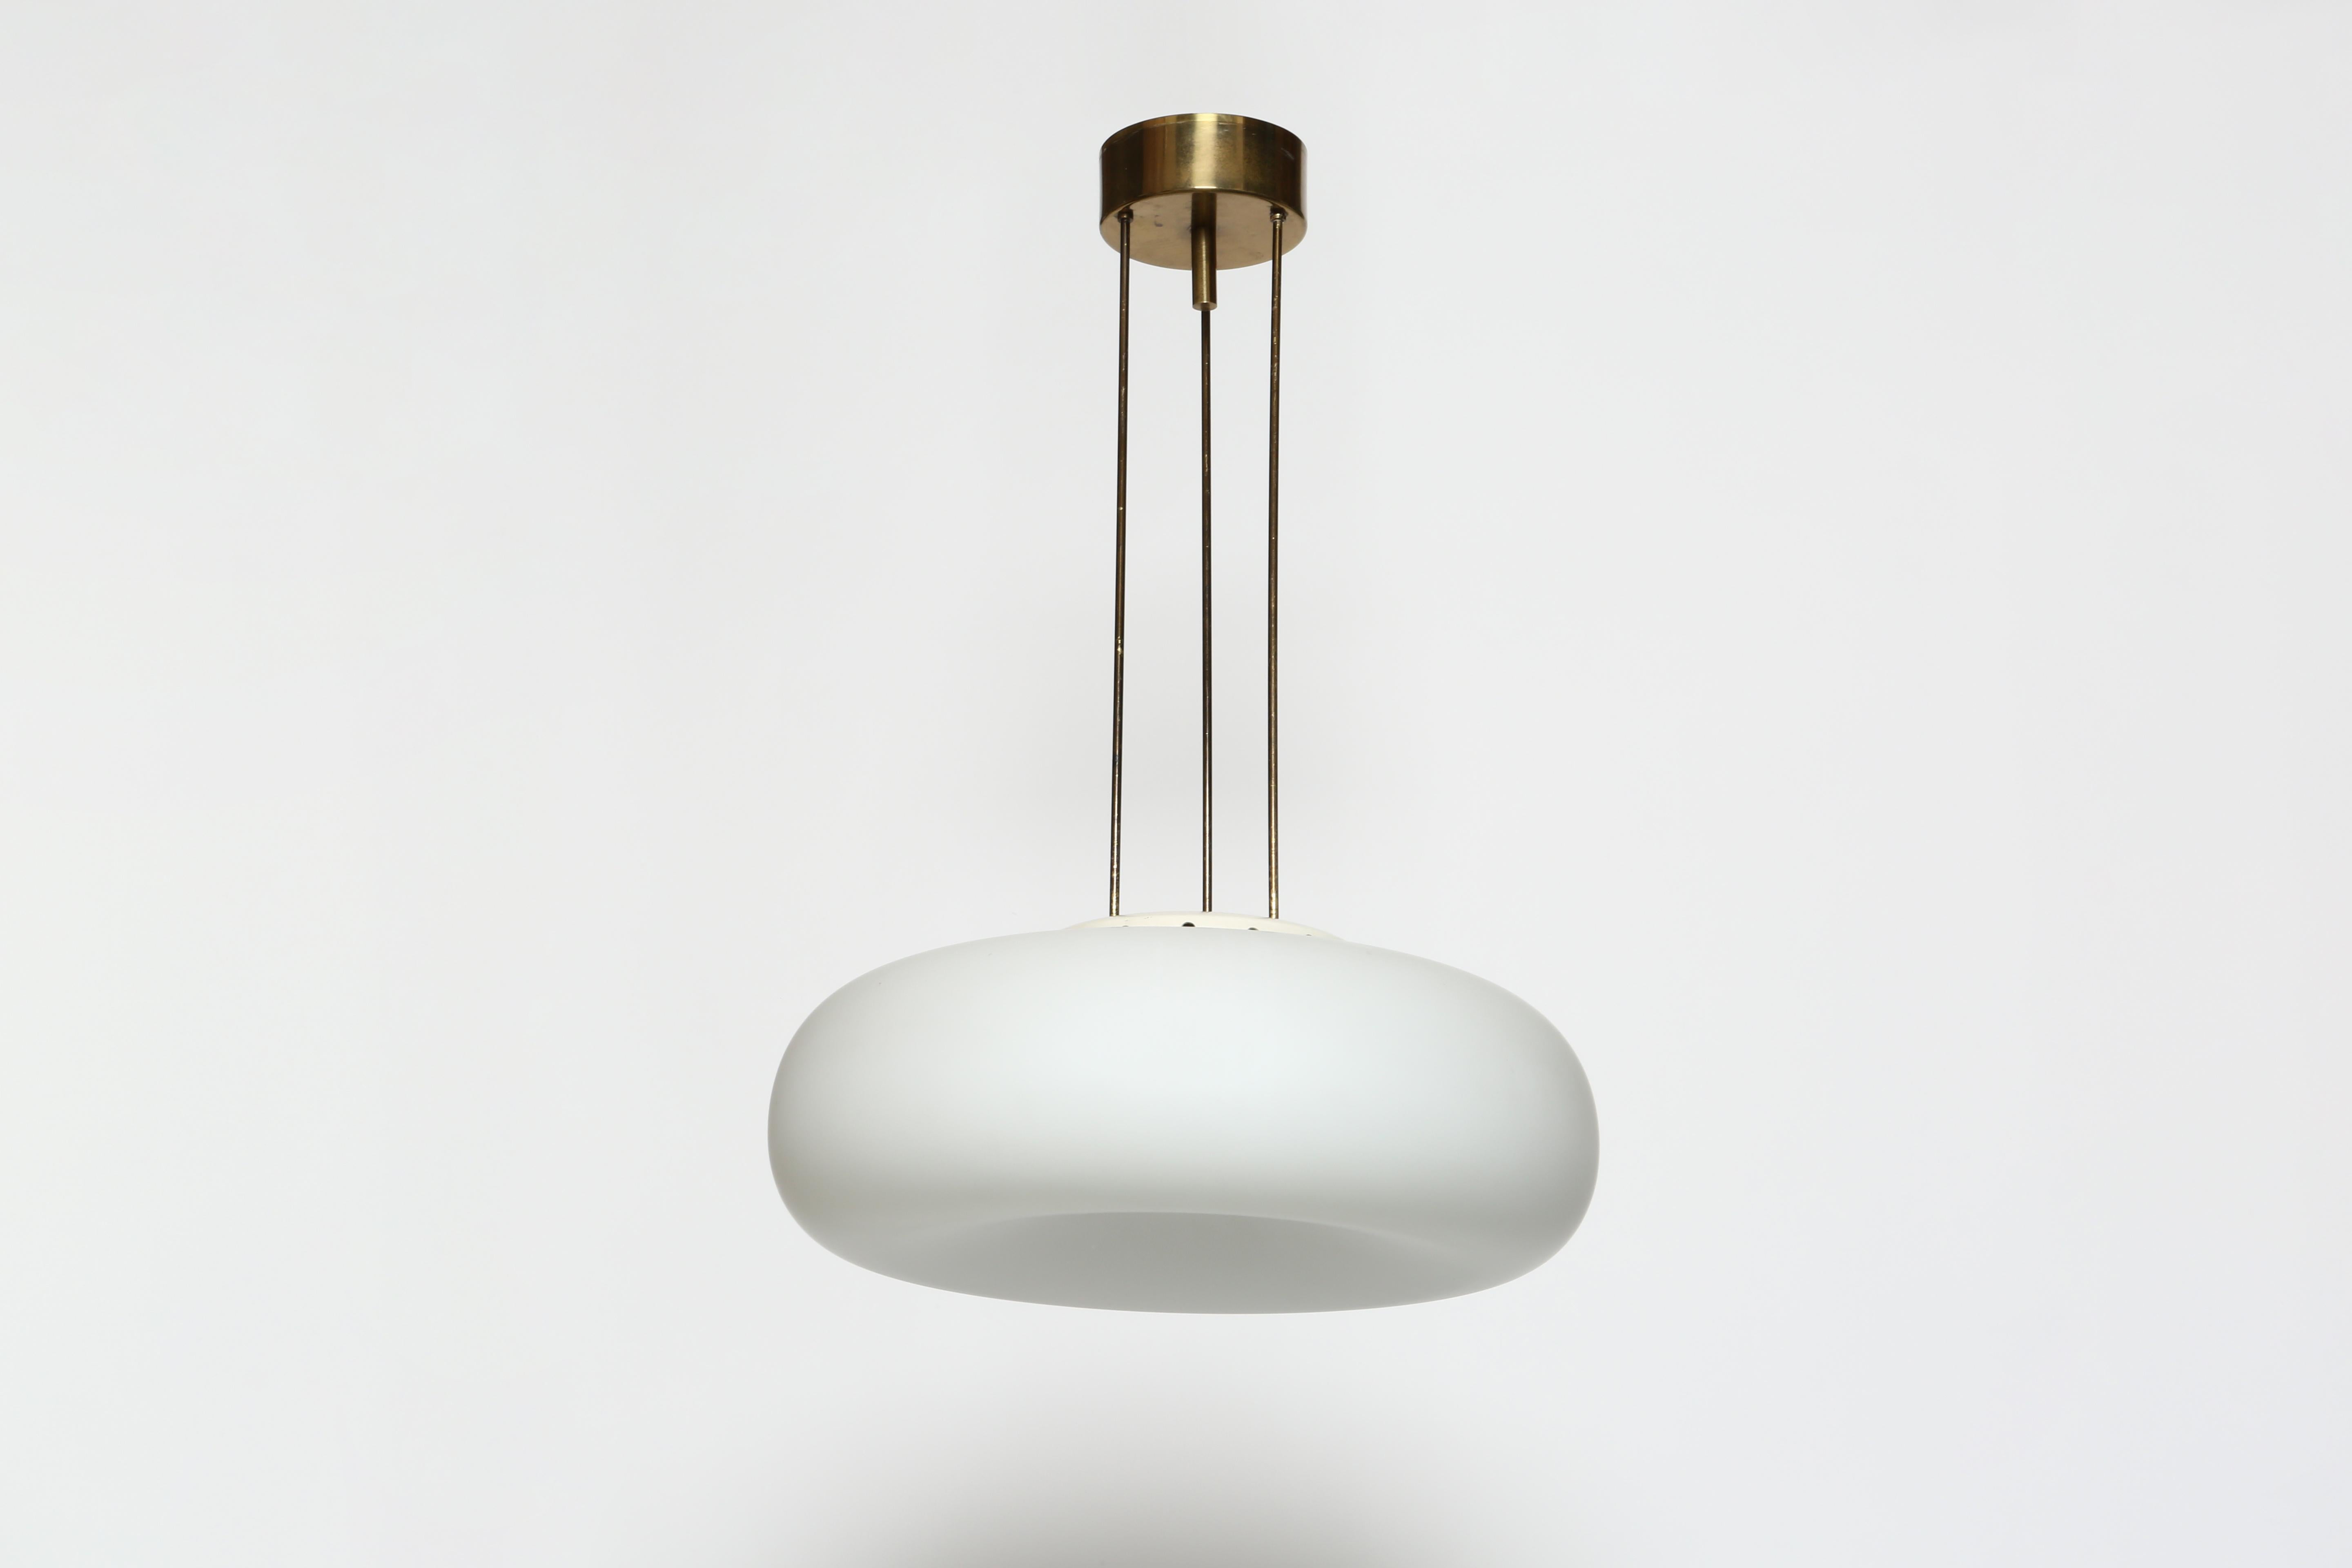 Max Ingrand for Fontana model 2356 ceiling suspension.
Designed and made in Italy in 1960s.
Satin opaline glass diffuser with beautiful warm patina brass.
Takes 4 candelabra E12 bulbs.
Complimentary US rewiring upon request.
Overall drop is